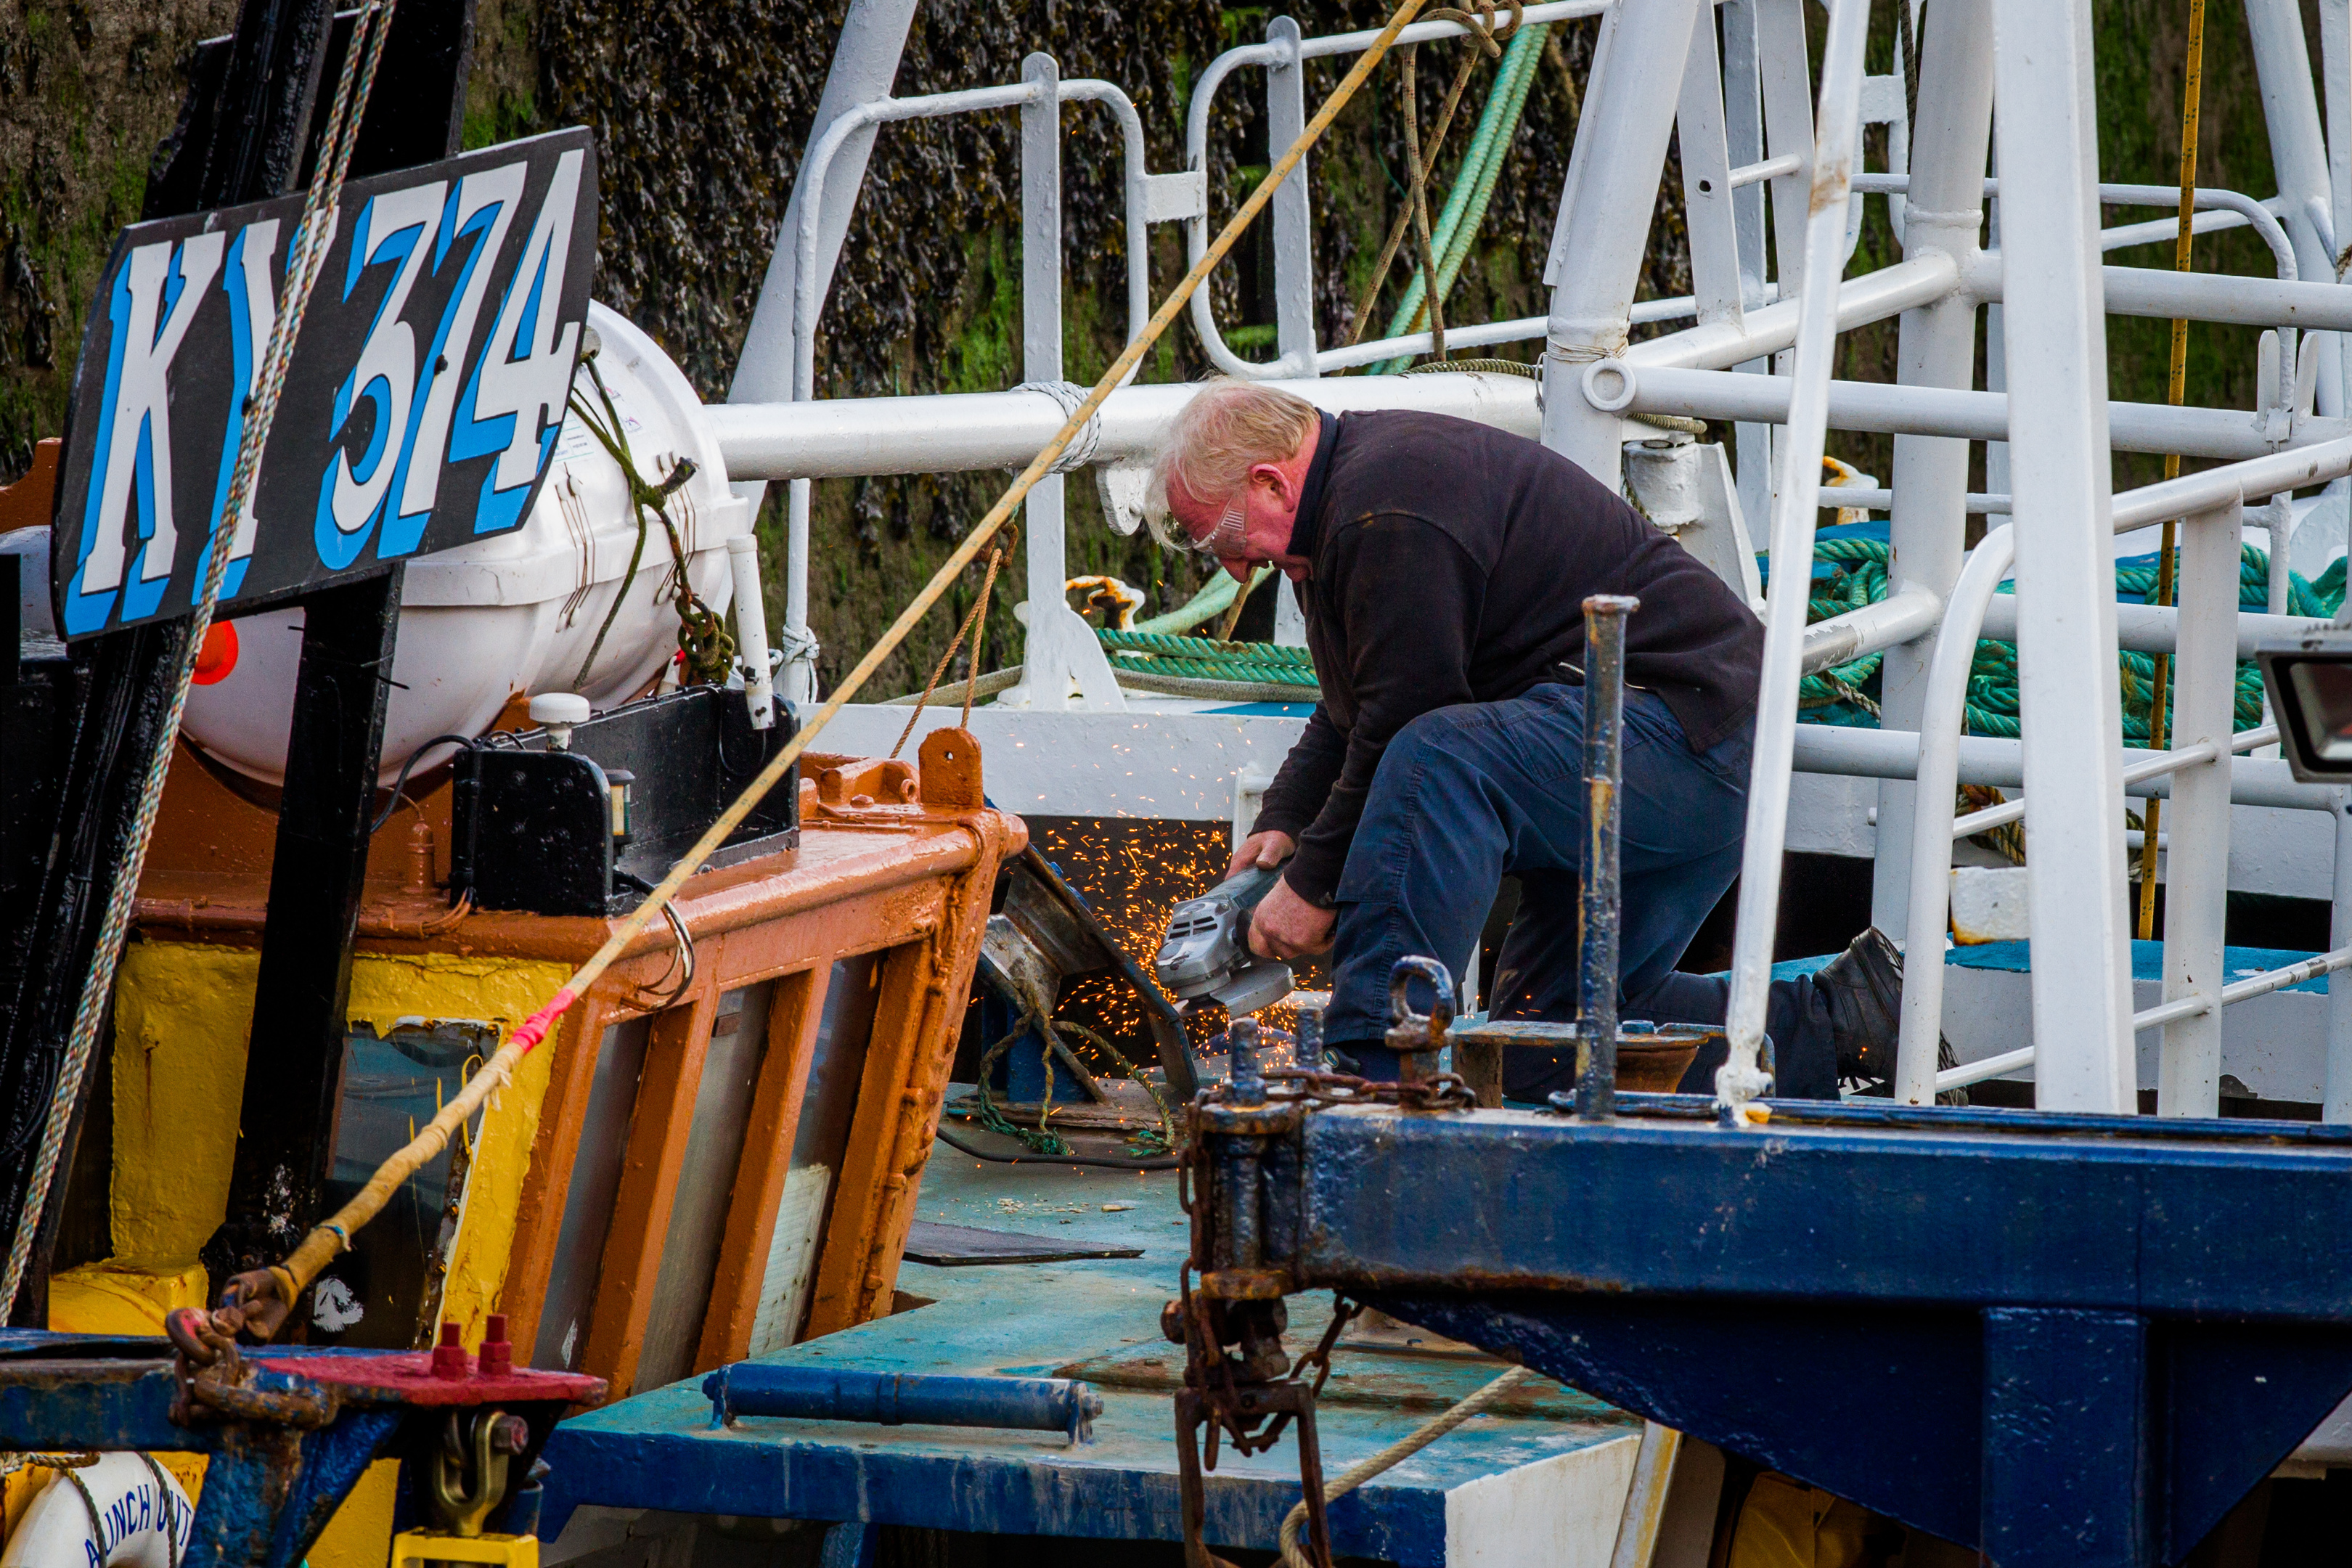 Picture shows maintenance work on some of the boats in Pittenweem Harbour.